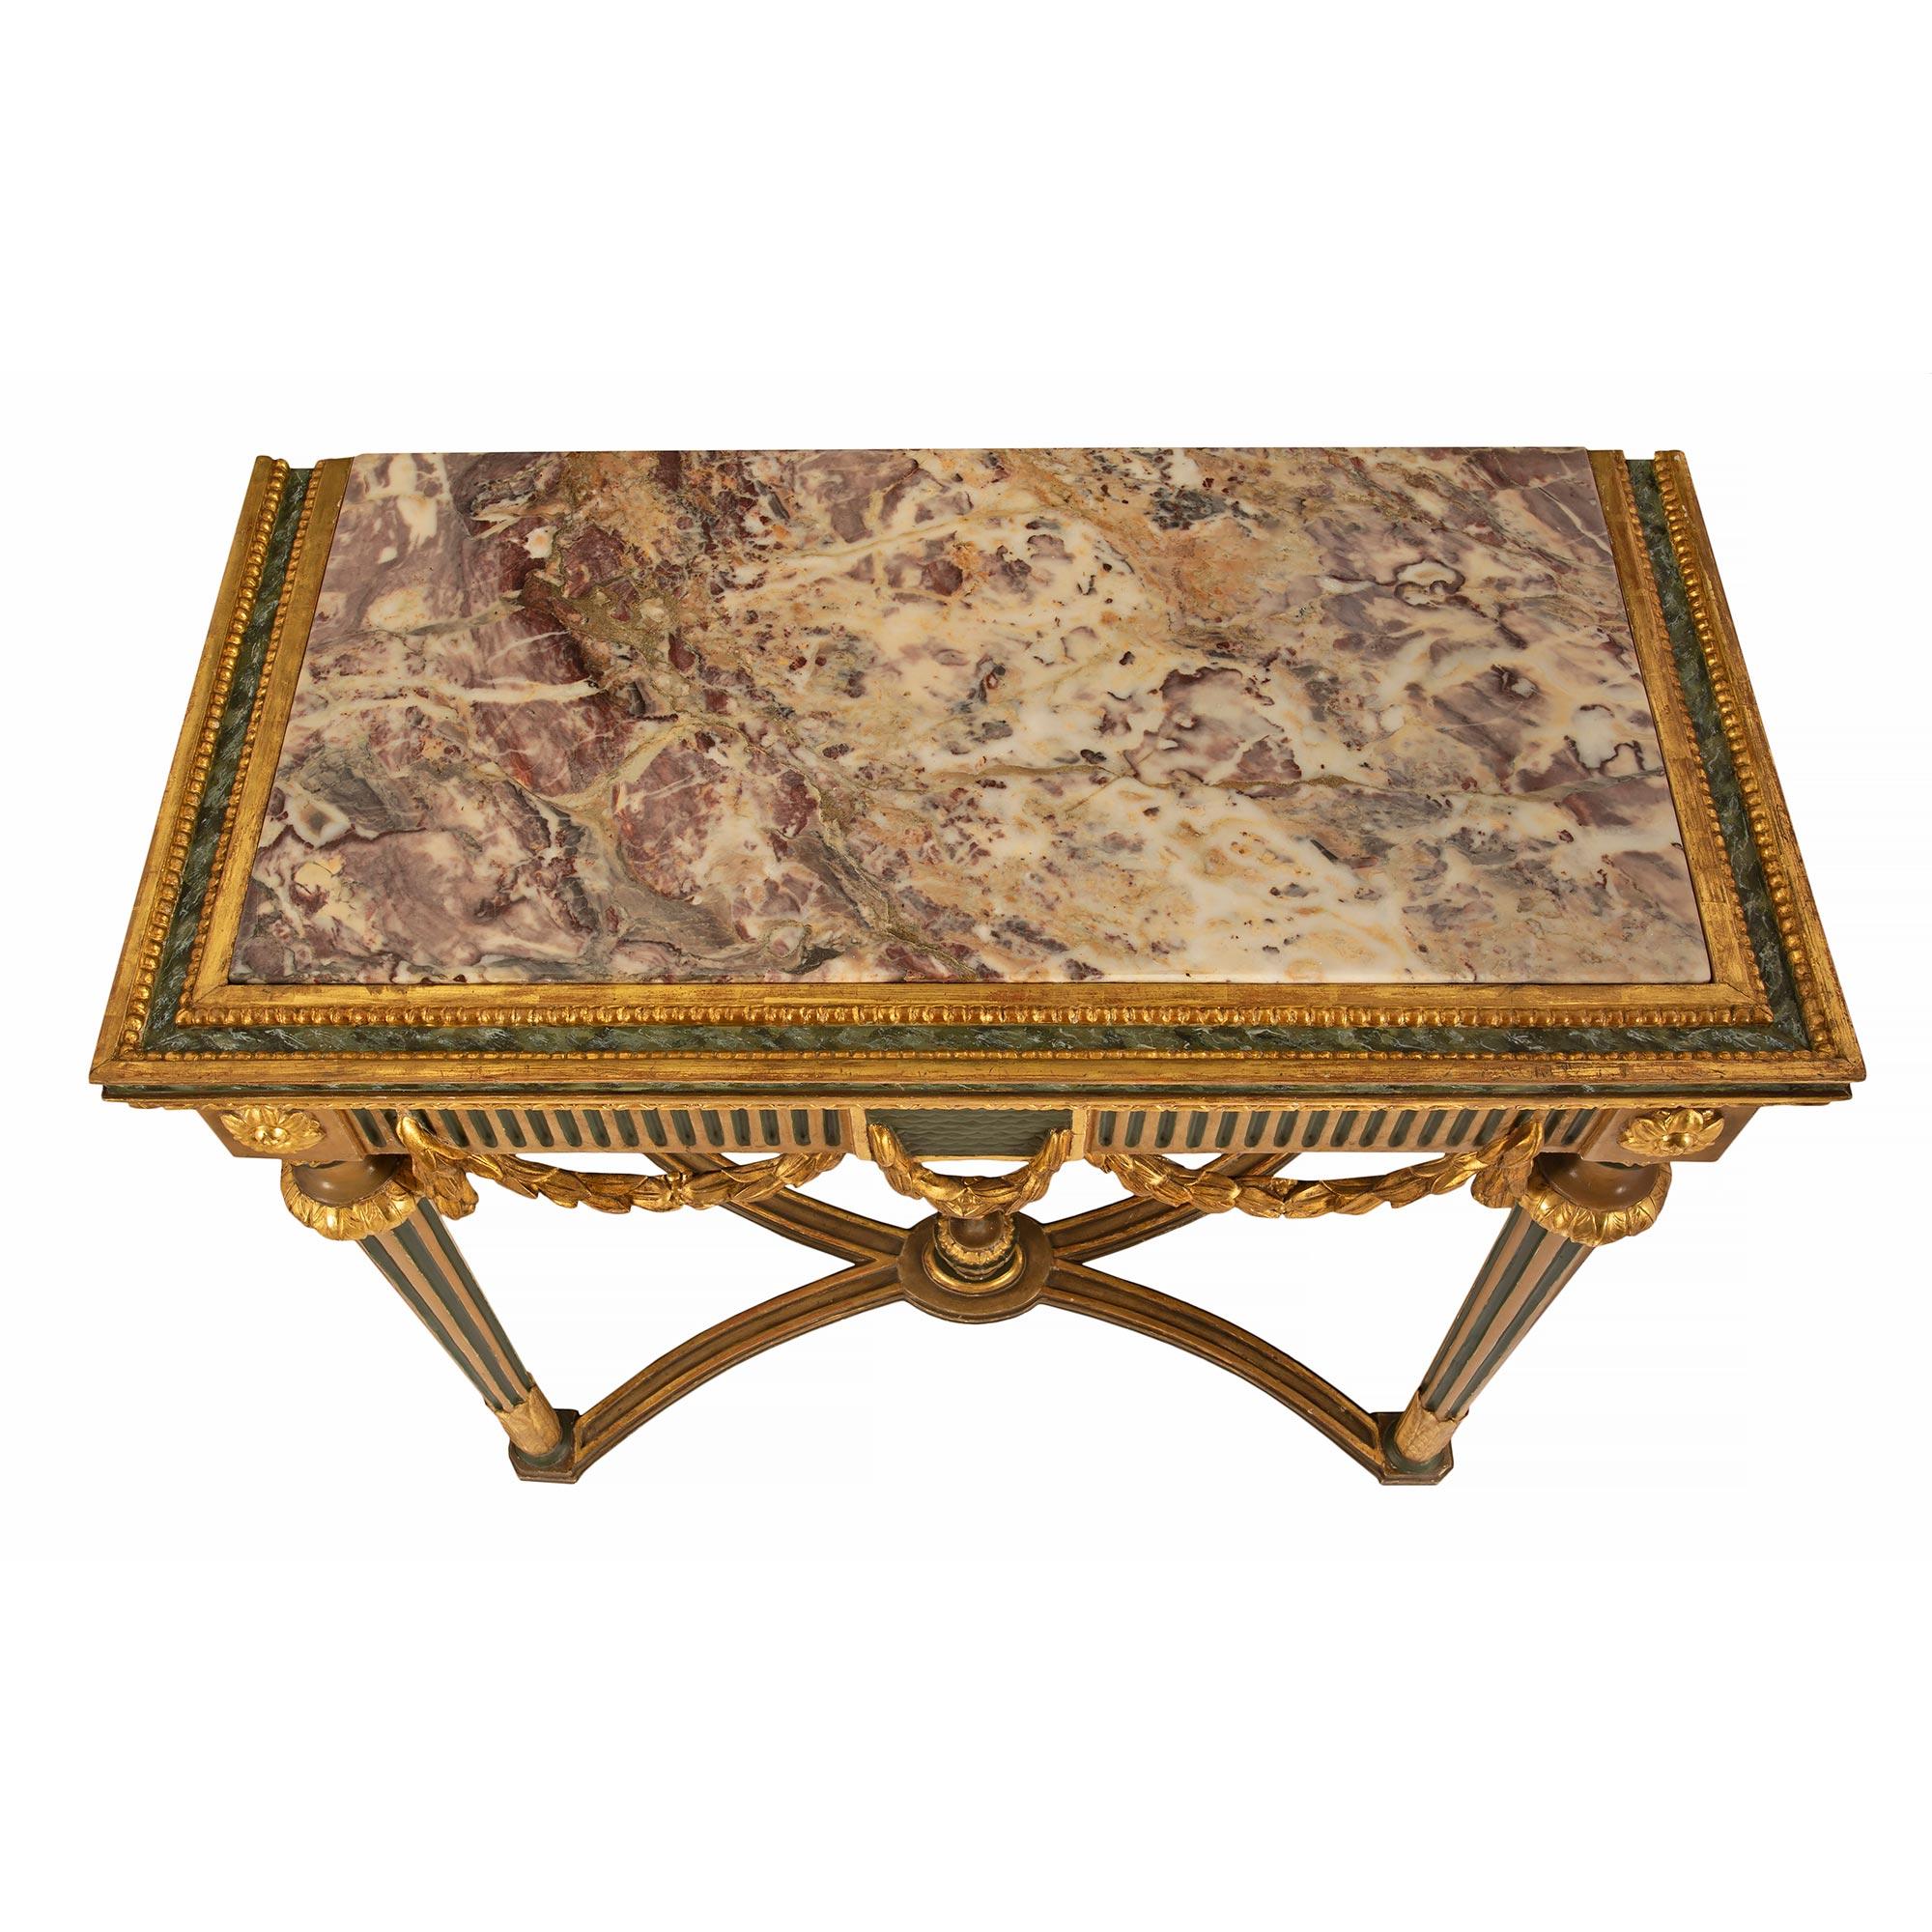 A beautiful and most decorative Italian 18th century Louis XVI period patinated, giltwood and Fleur de Pécher marble freestanding console. The console is raised by topie shaped feet with patinated tapered fluted legs accented by giltwood acanthus